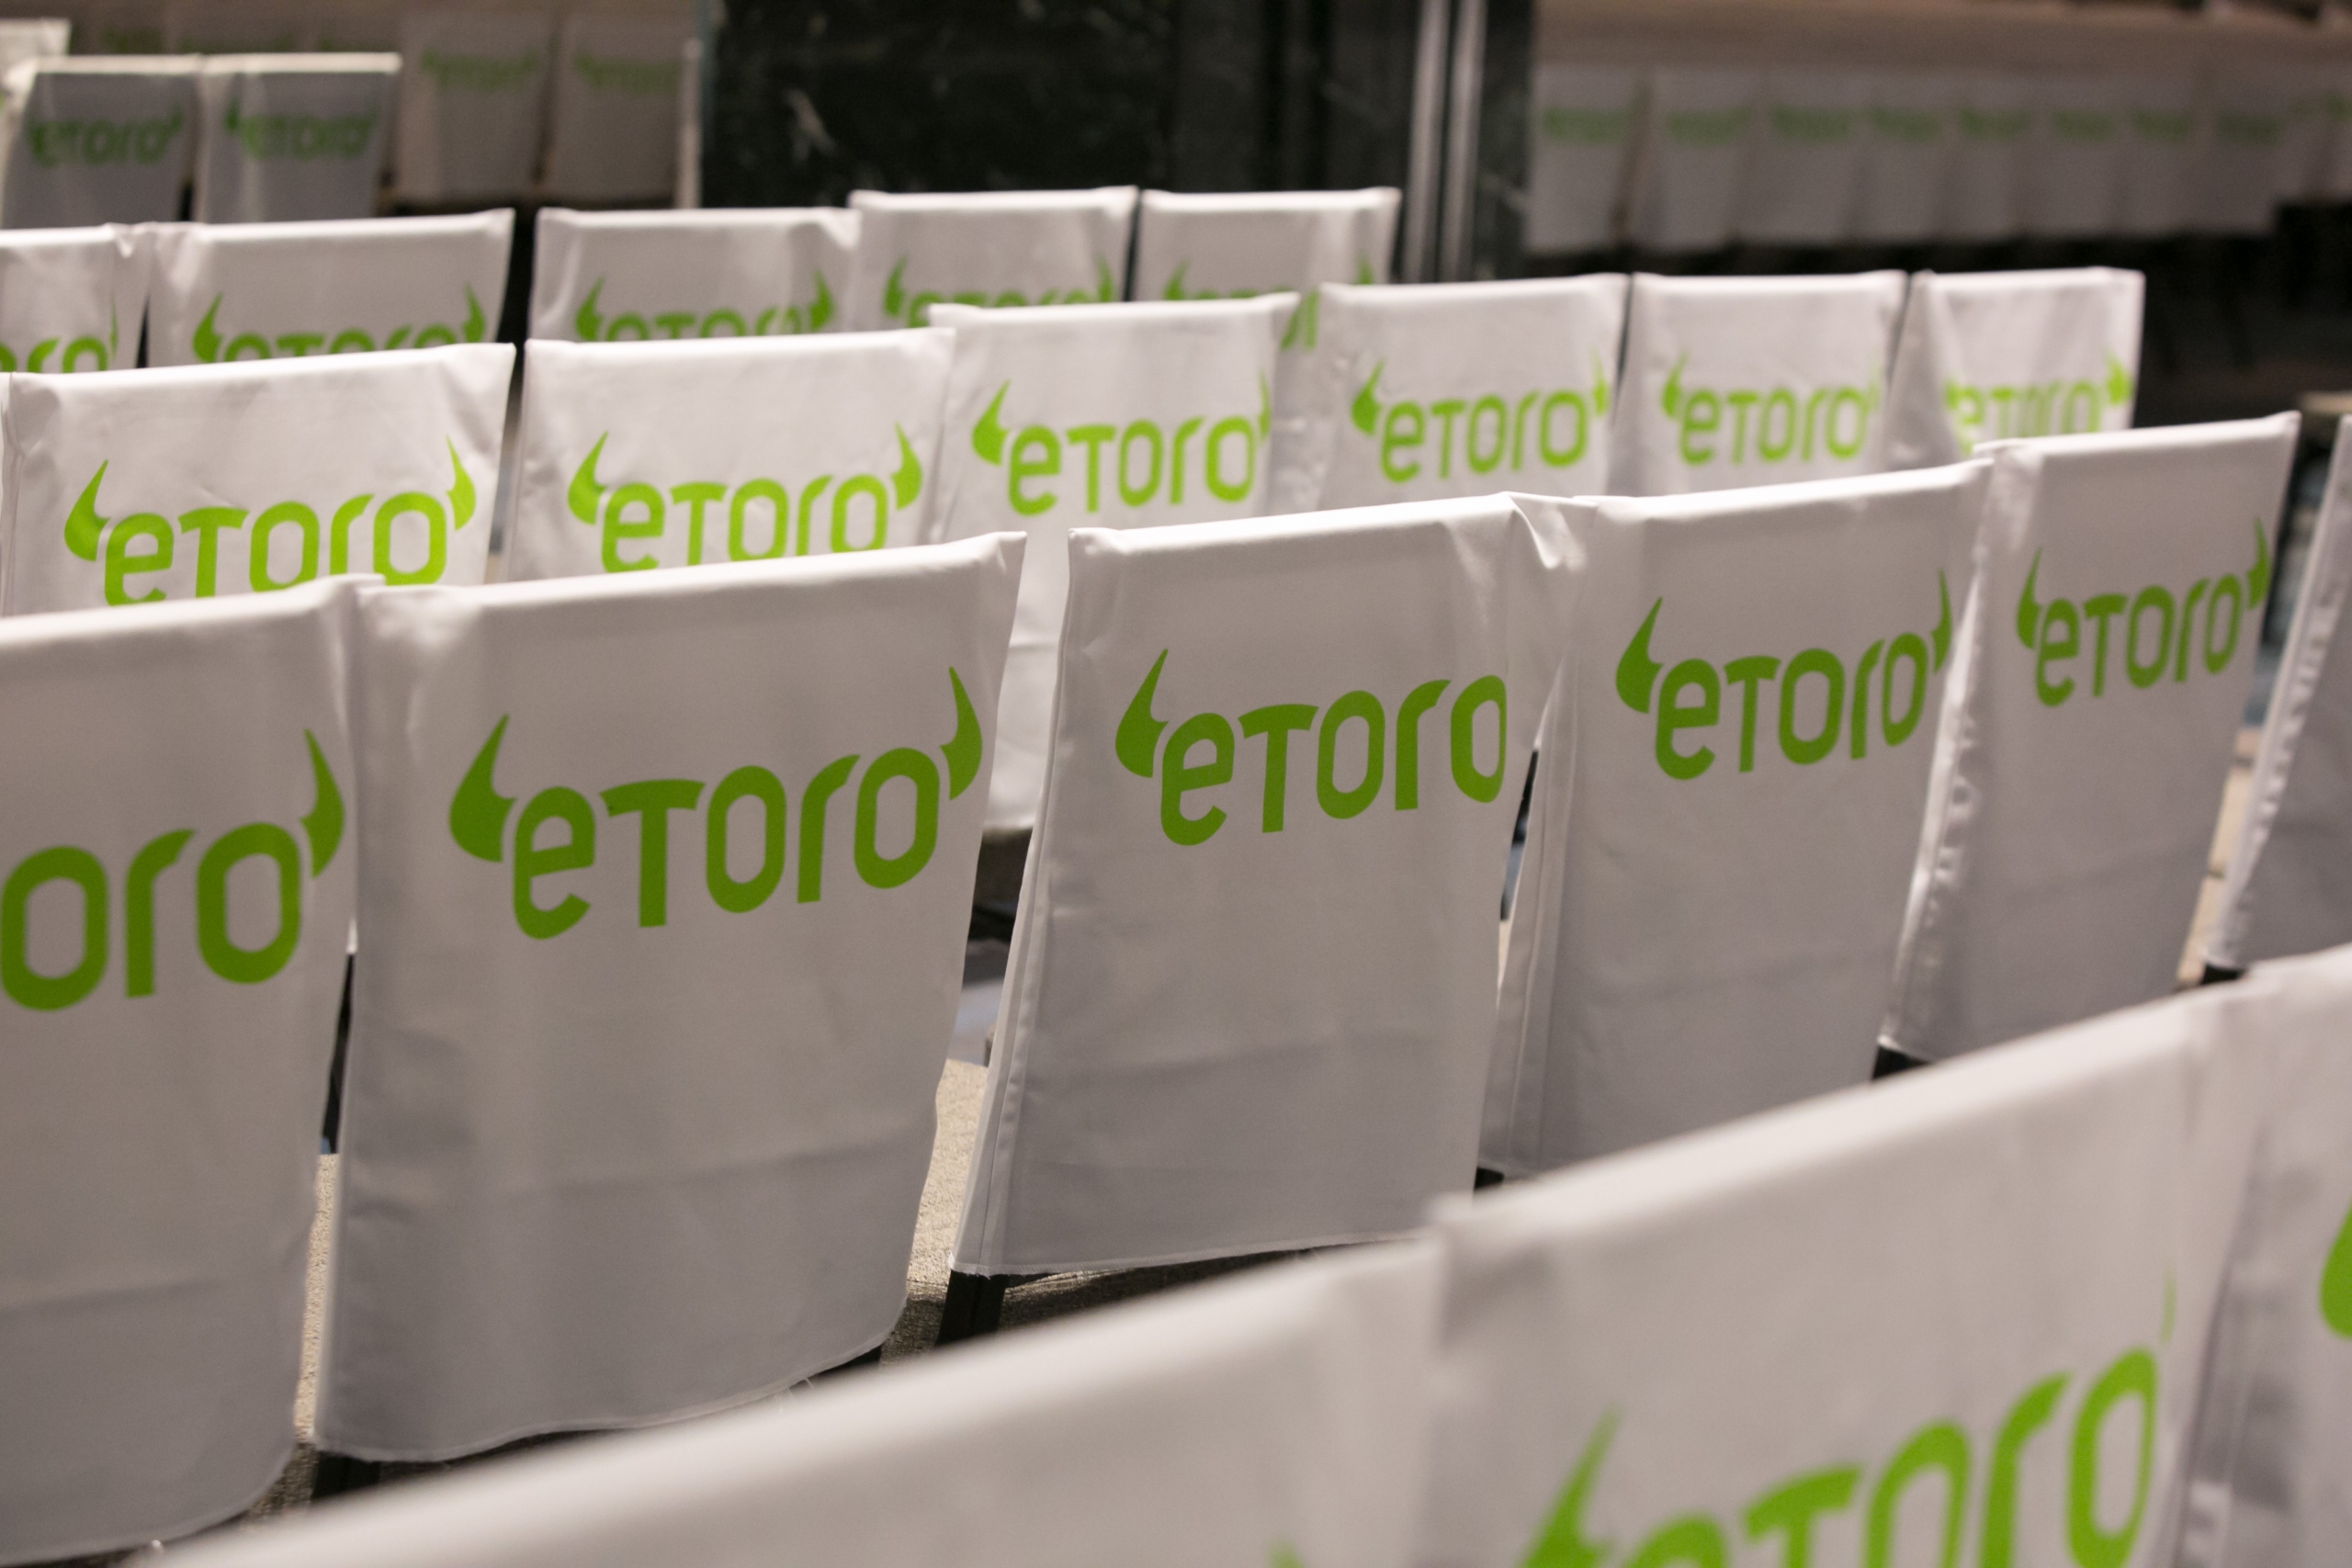 Defi-meets-universal-basic-income-with-just-launched-project-from-etoro